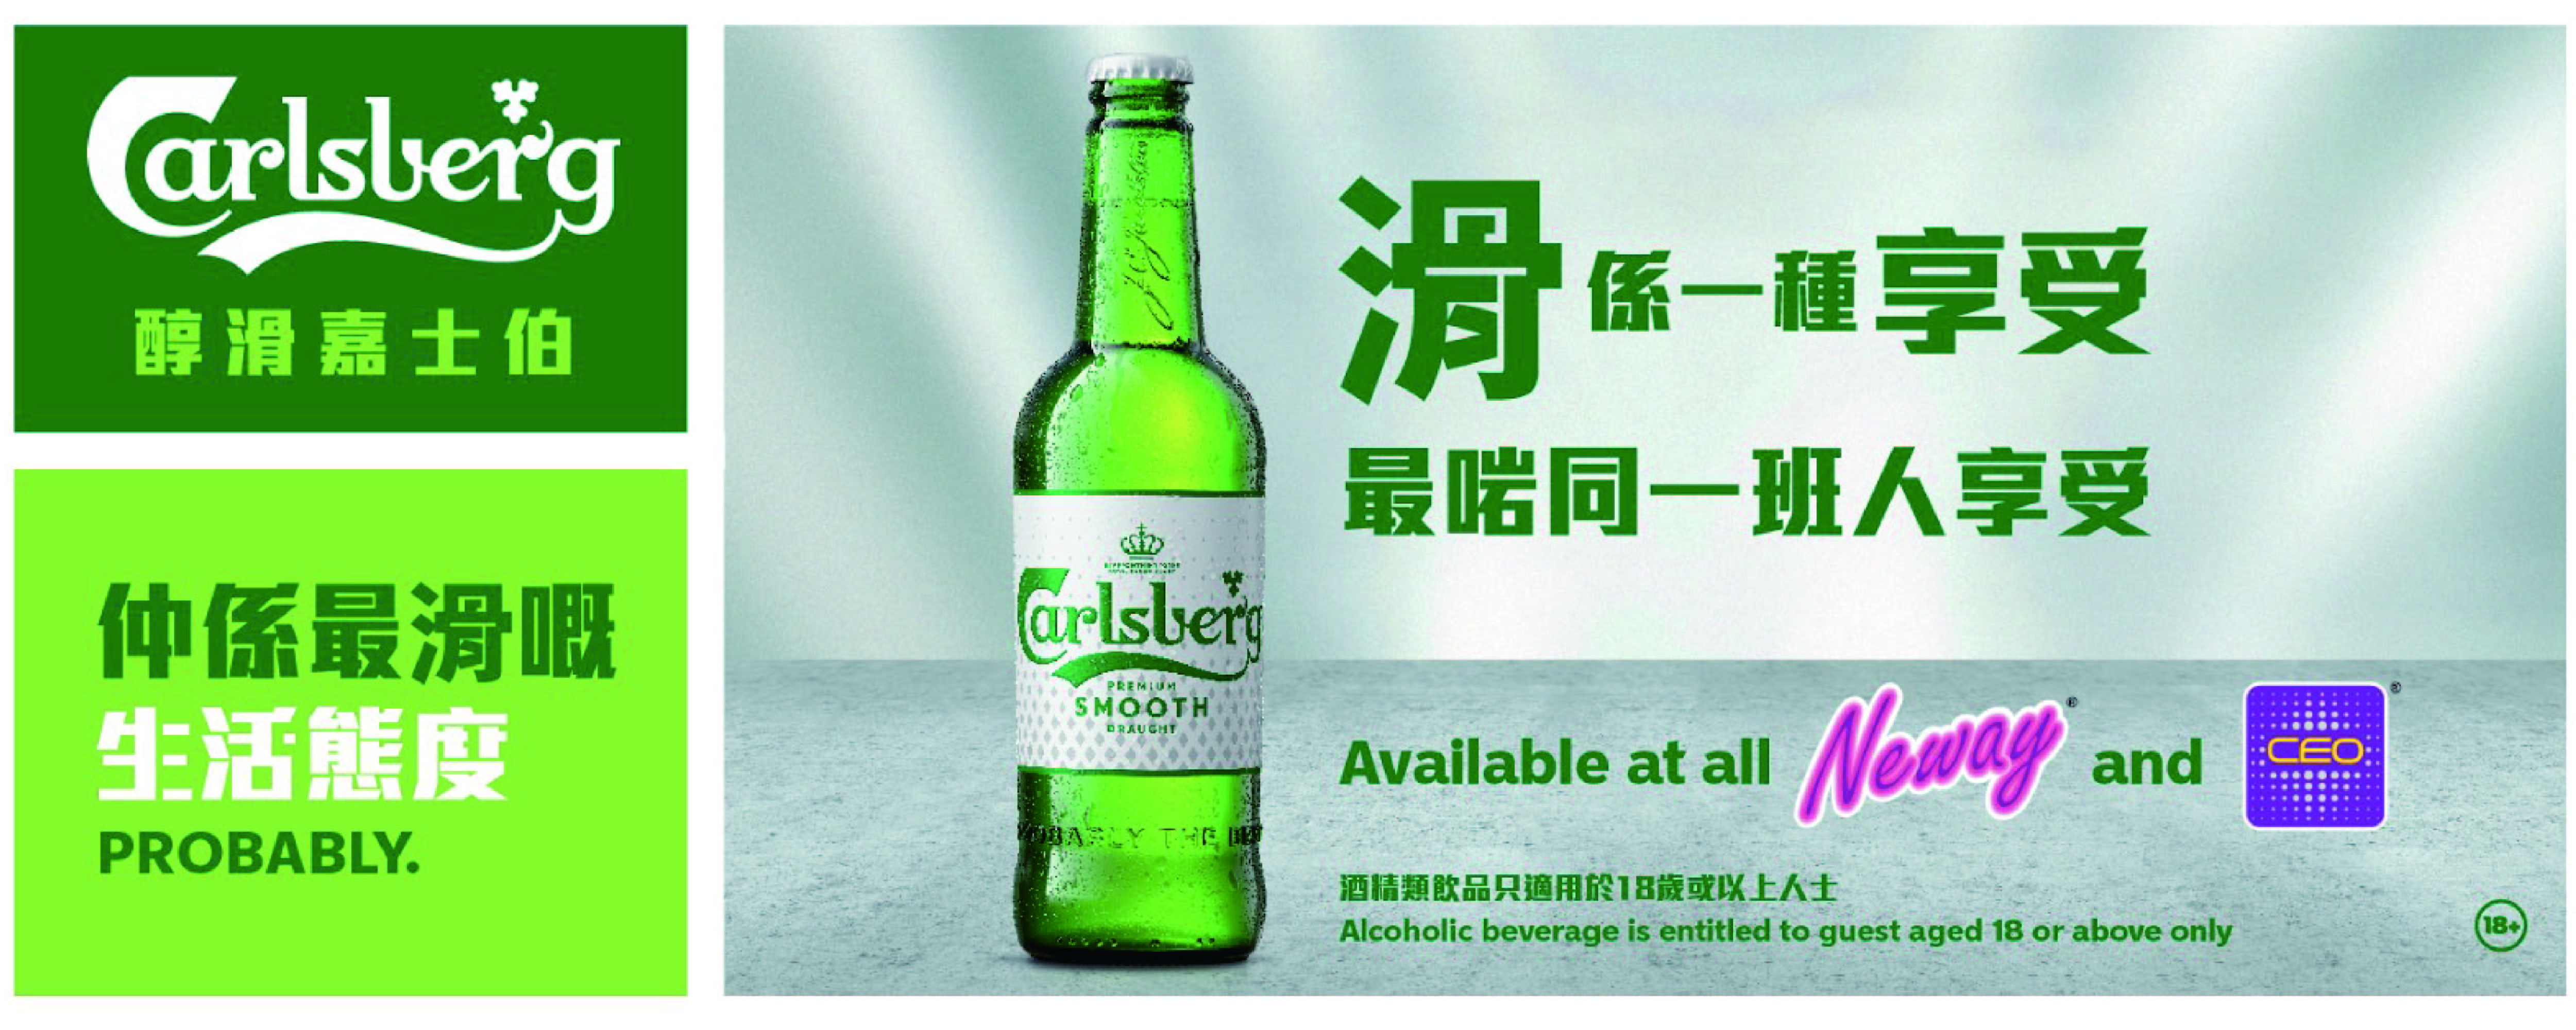 Carlsberg Smooth Draught is available at all Neway & CEO now